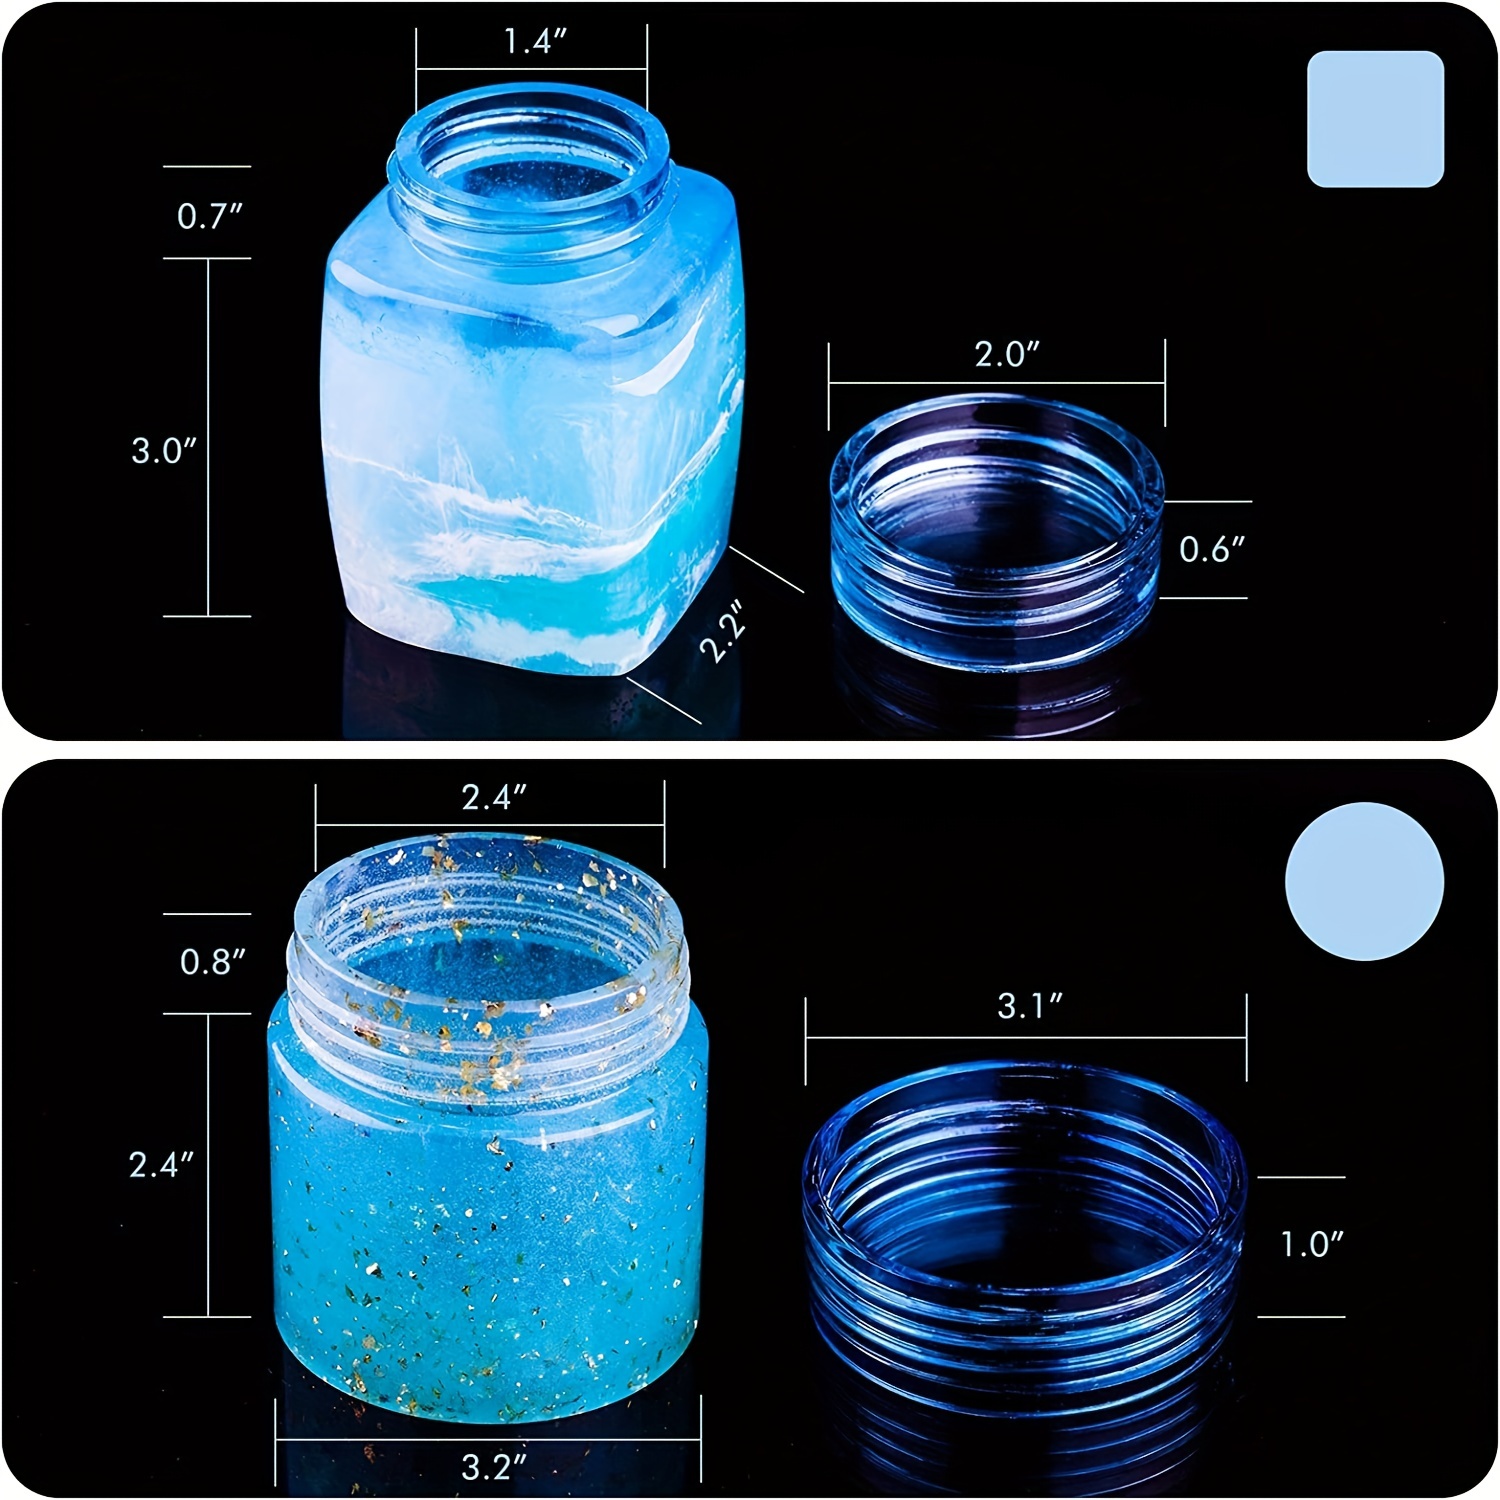  Small Bottle Container and Stopper UV Resin Epoxy Silicone Mold  Jewelry Casting 6 Trays Set with Manual : Arts, Crafts & Sewing